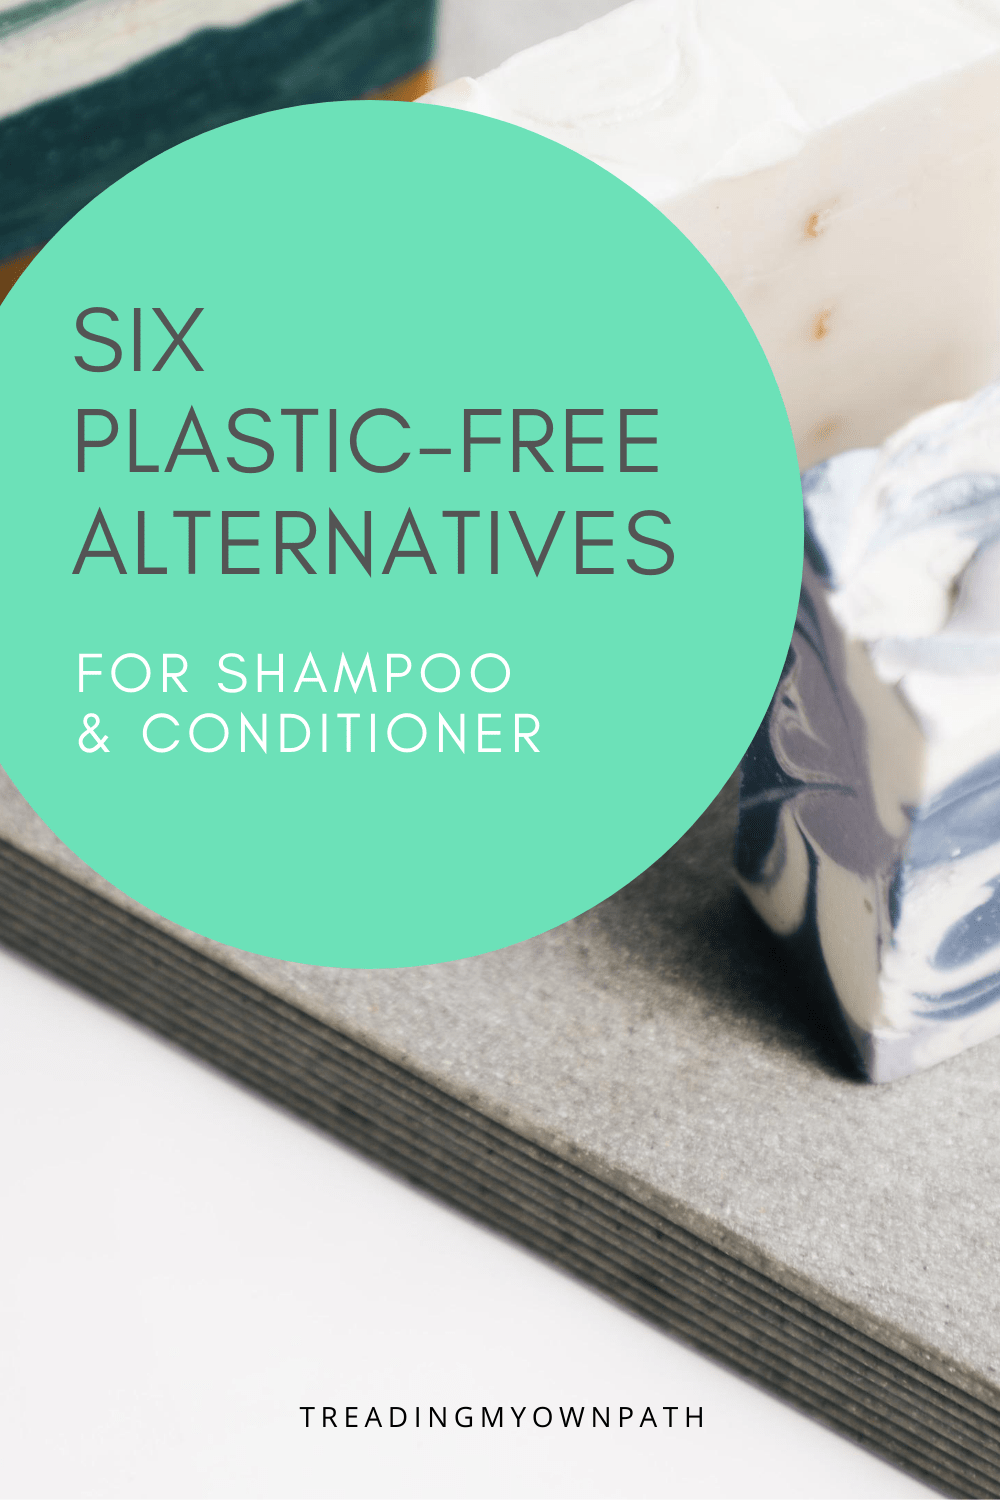 6 Plastic-Free Alternatives for Shampoo and Conditioner